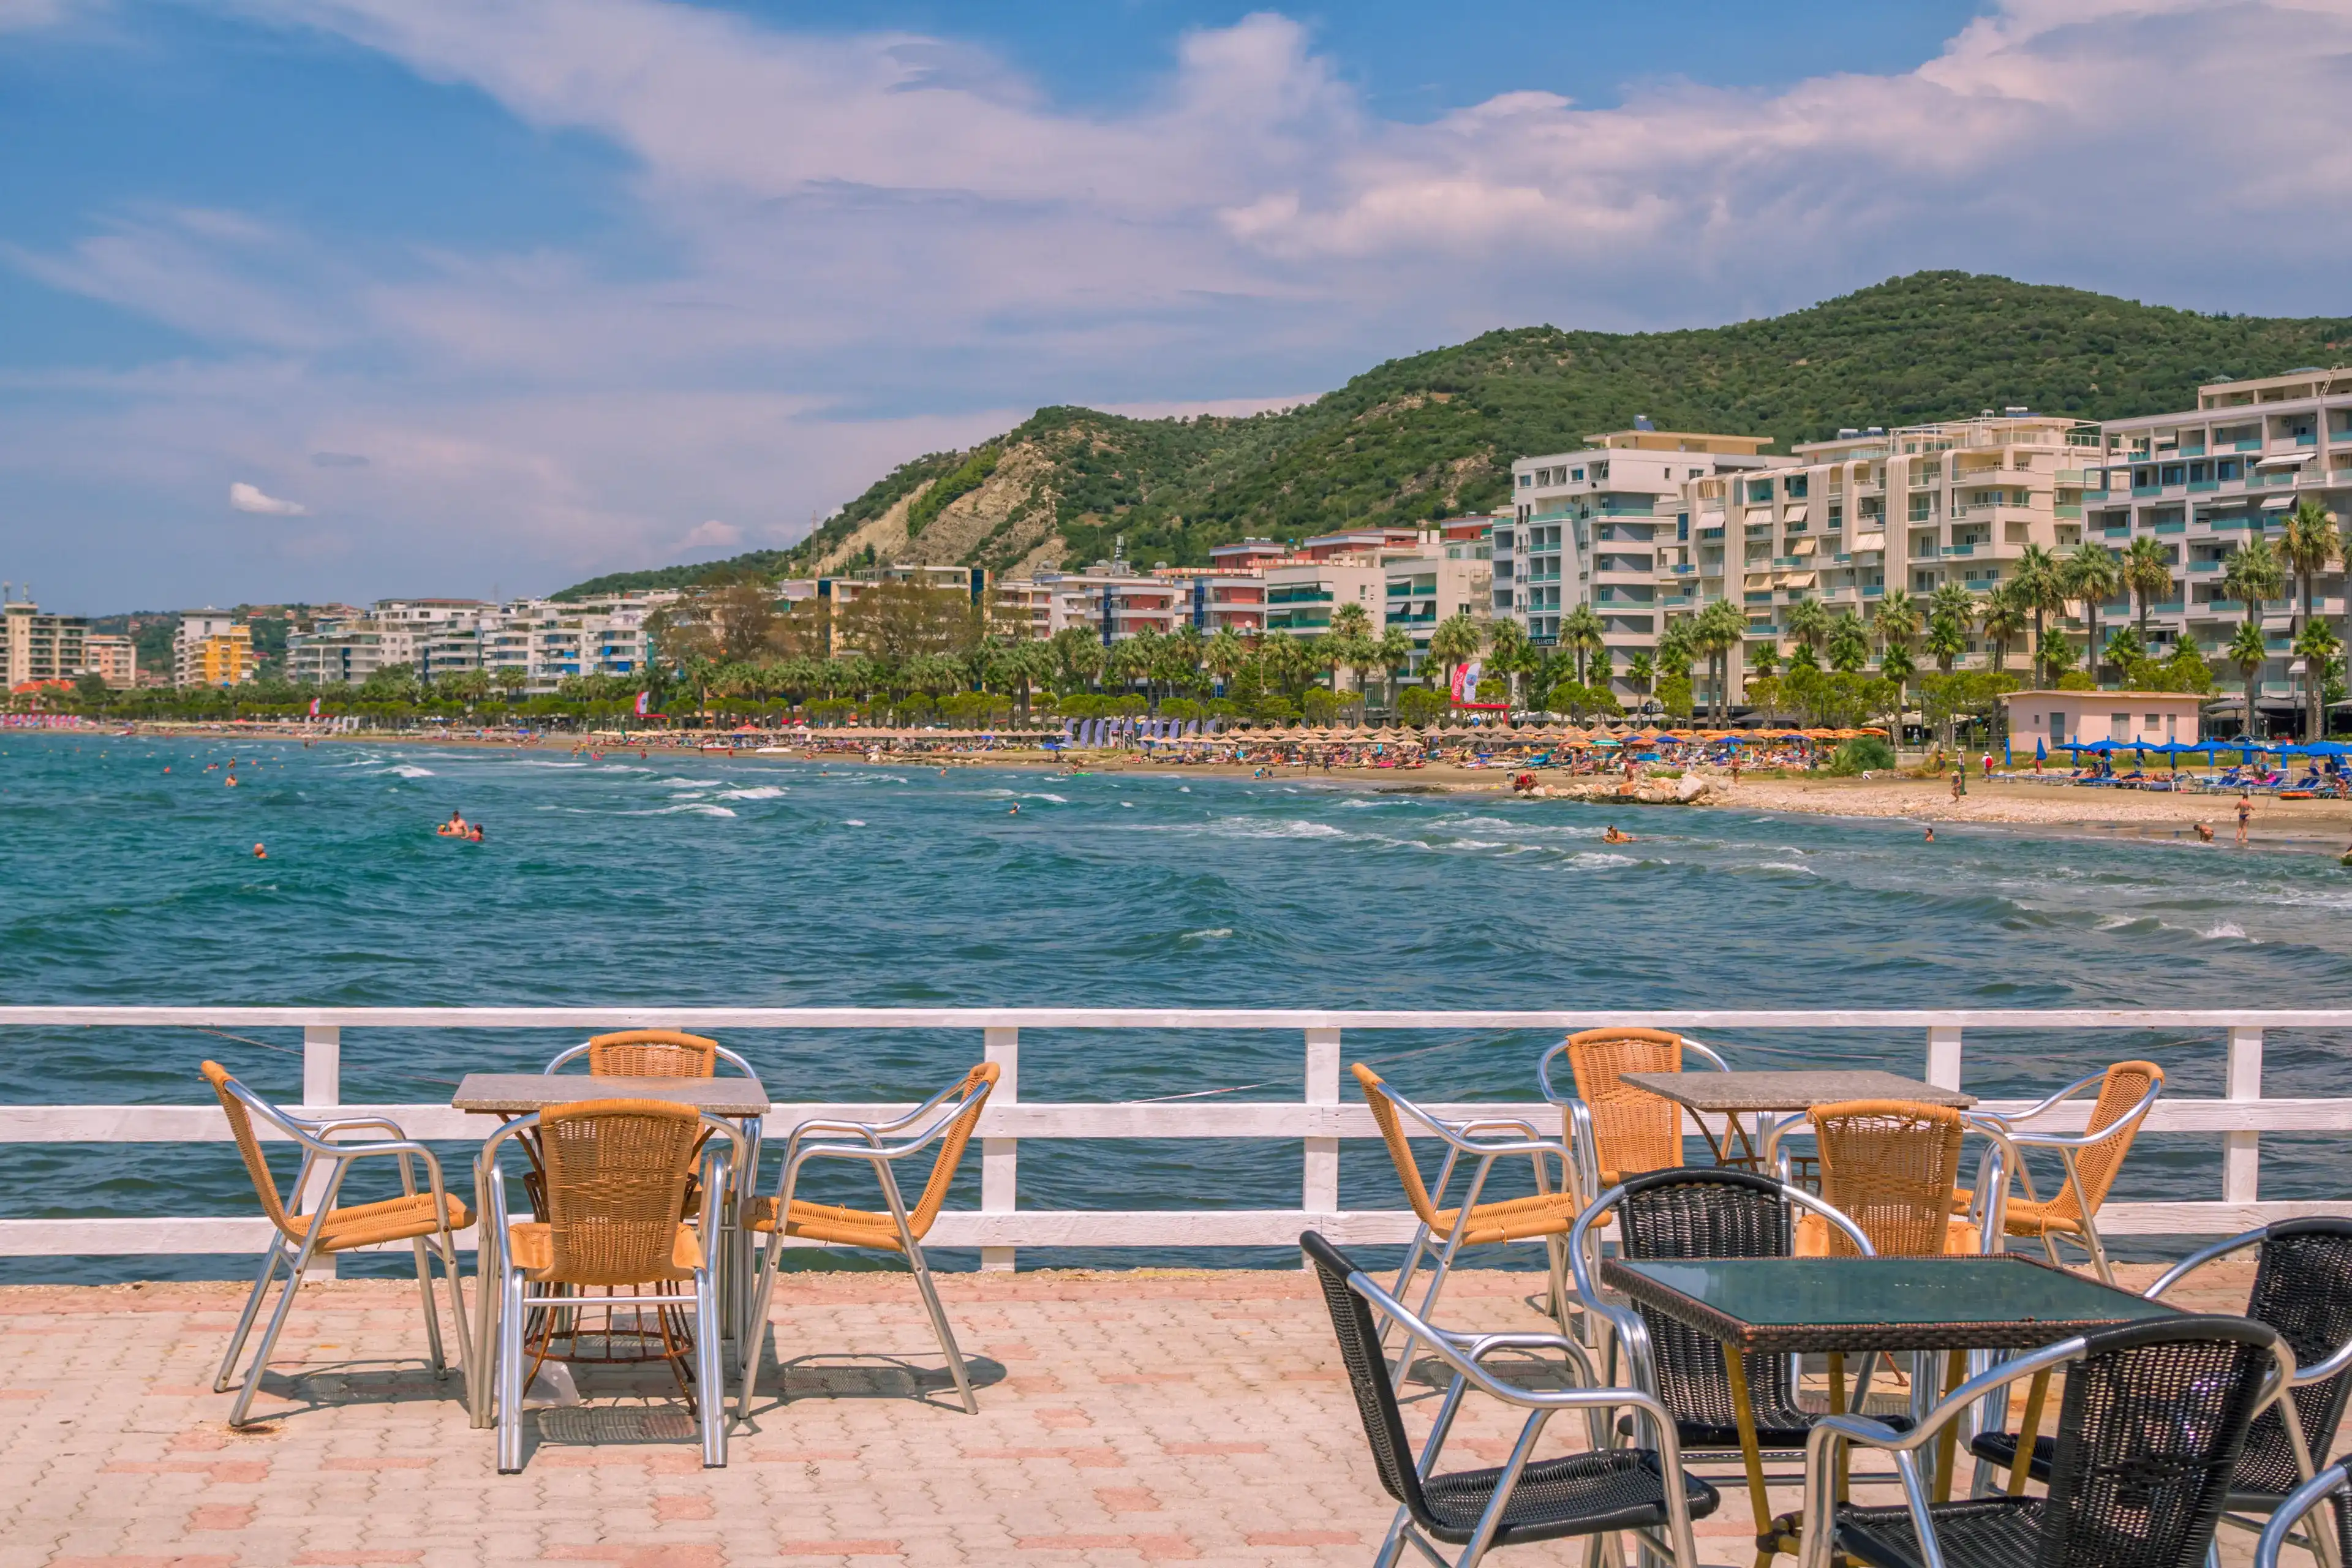 Vlora, Albania - August 7, 2020: summer resort –outdoors café – tables and chairs, turquoise sea water, people swimming, sunbathing on the beach, hotels buildings, blue sky and mountain on background